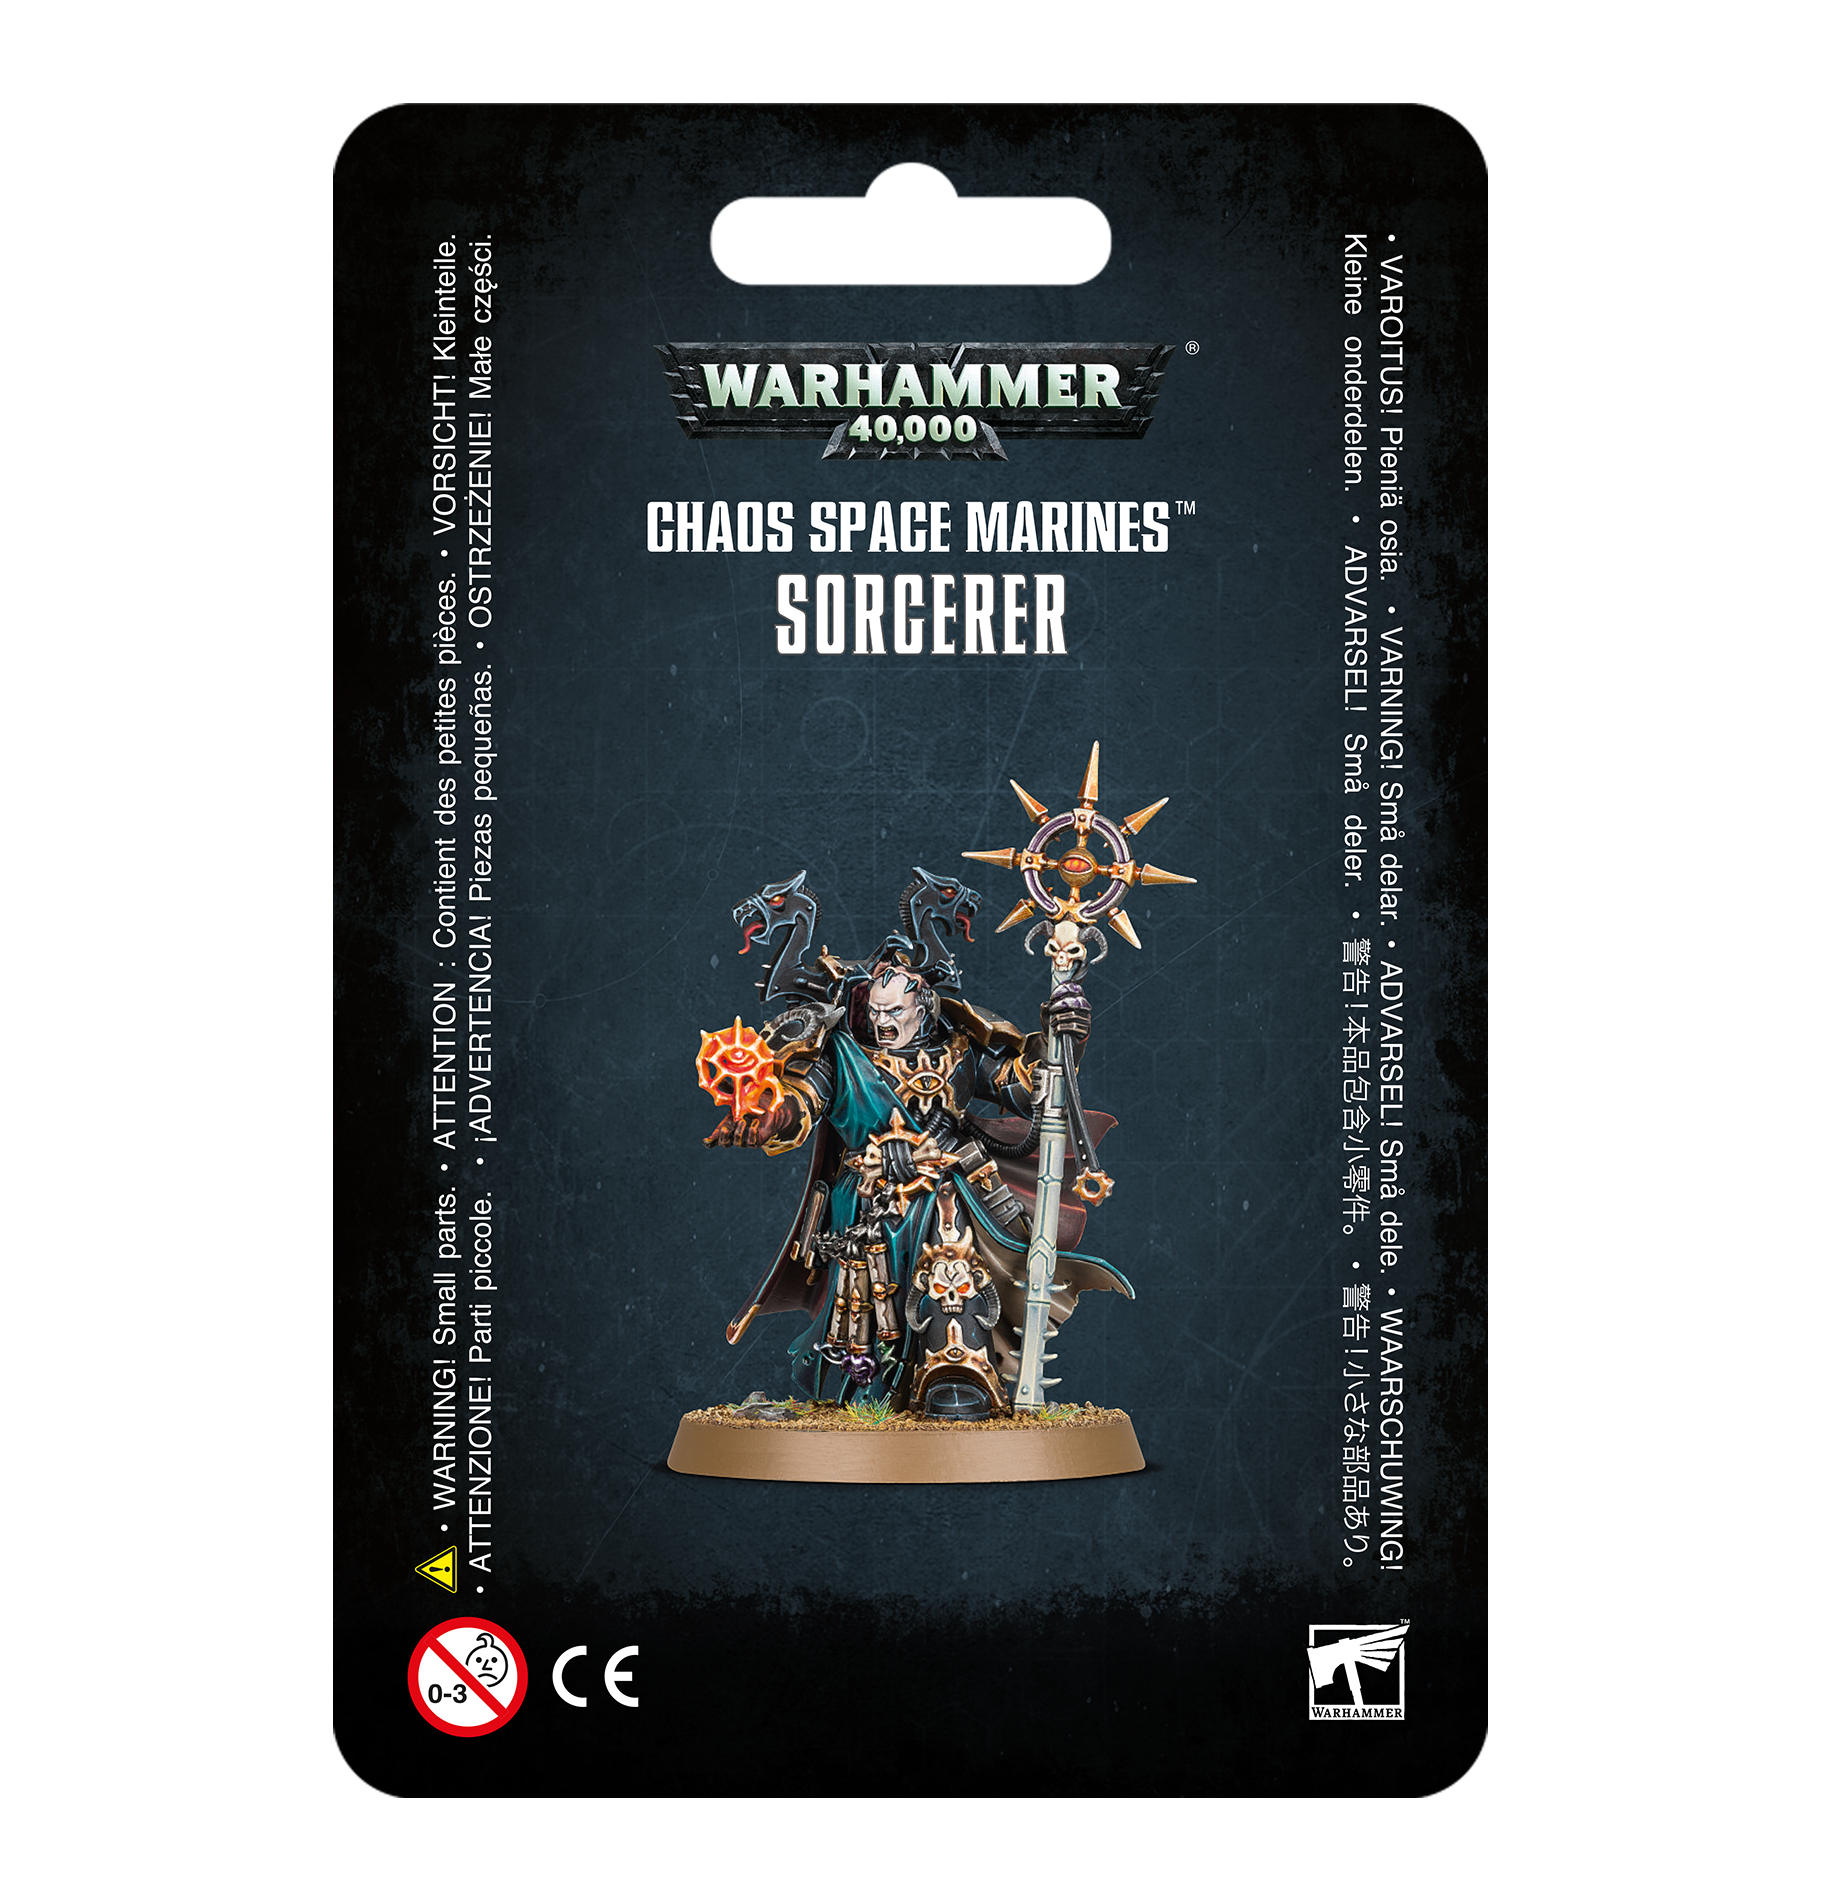 Warhammer 40,000: Chaos Space Marines: Sorcerer (2019) 